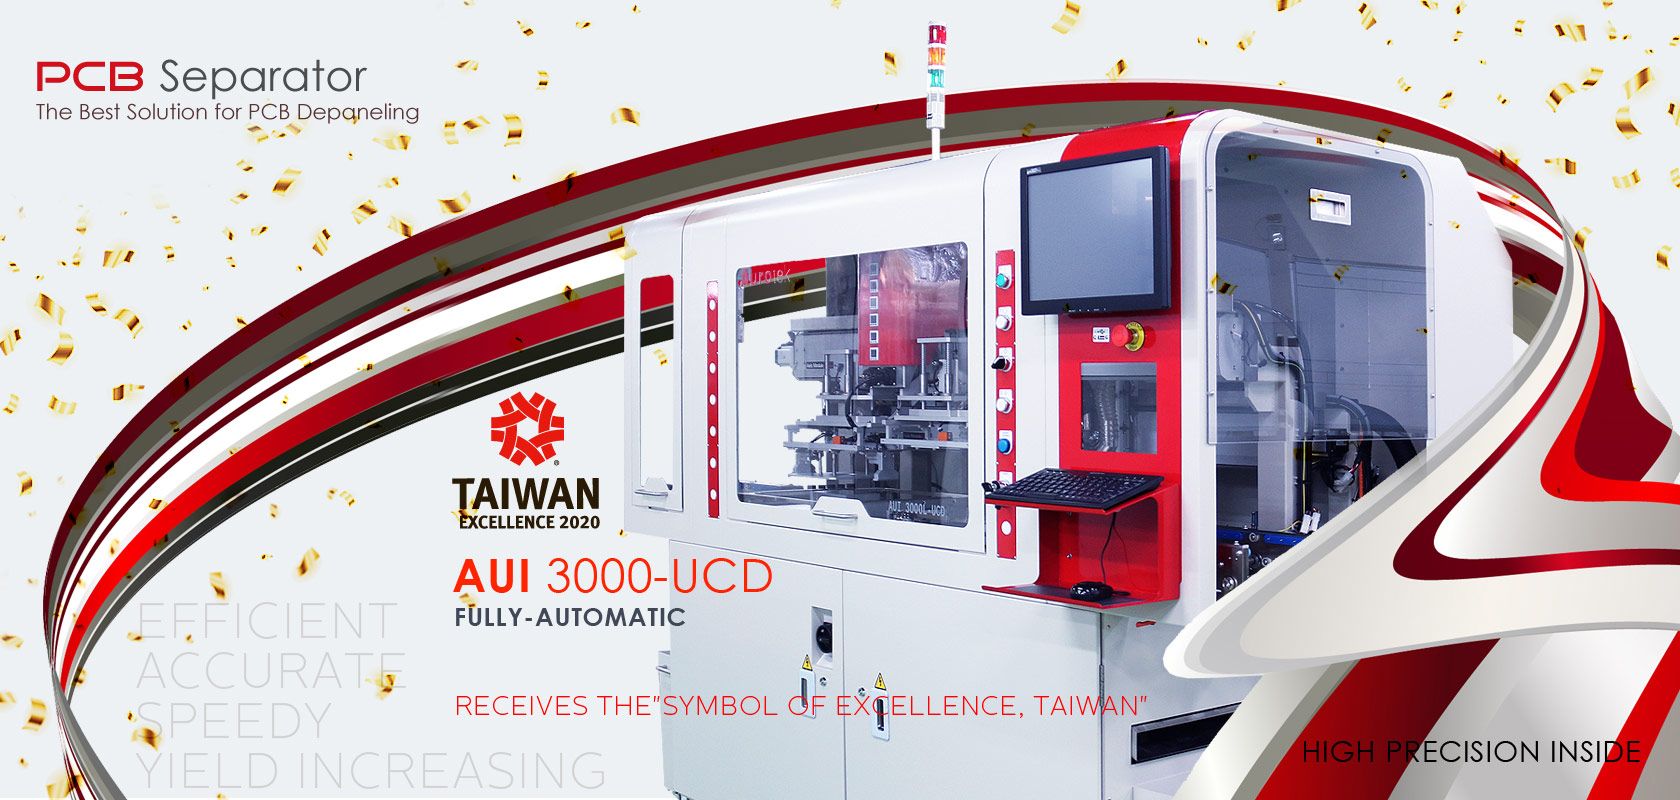 AUI 3000-UCD PCB Separator receives the "Symbol of Excellence, Taiwan".